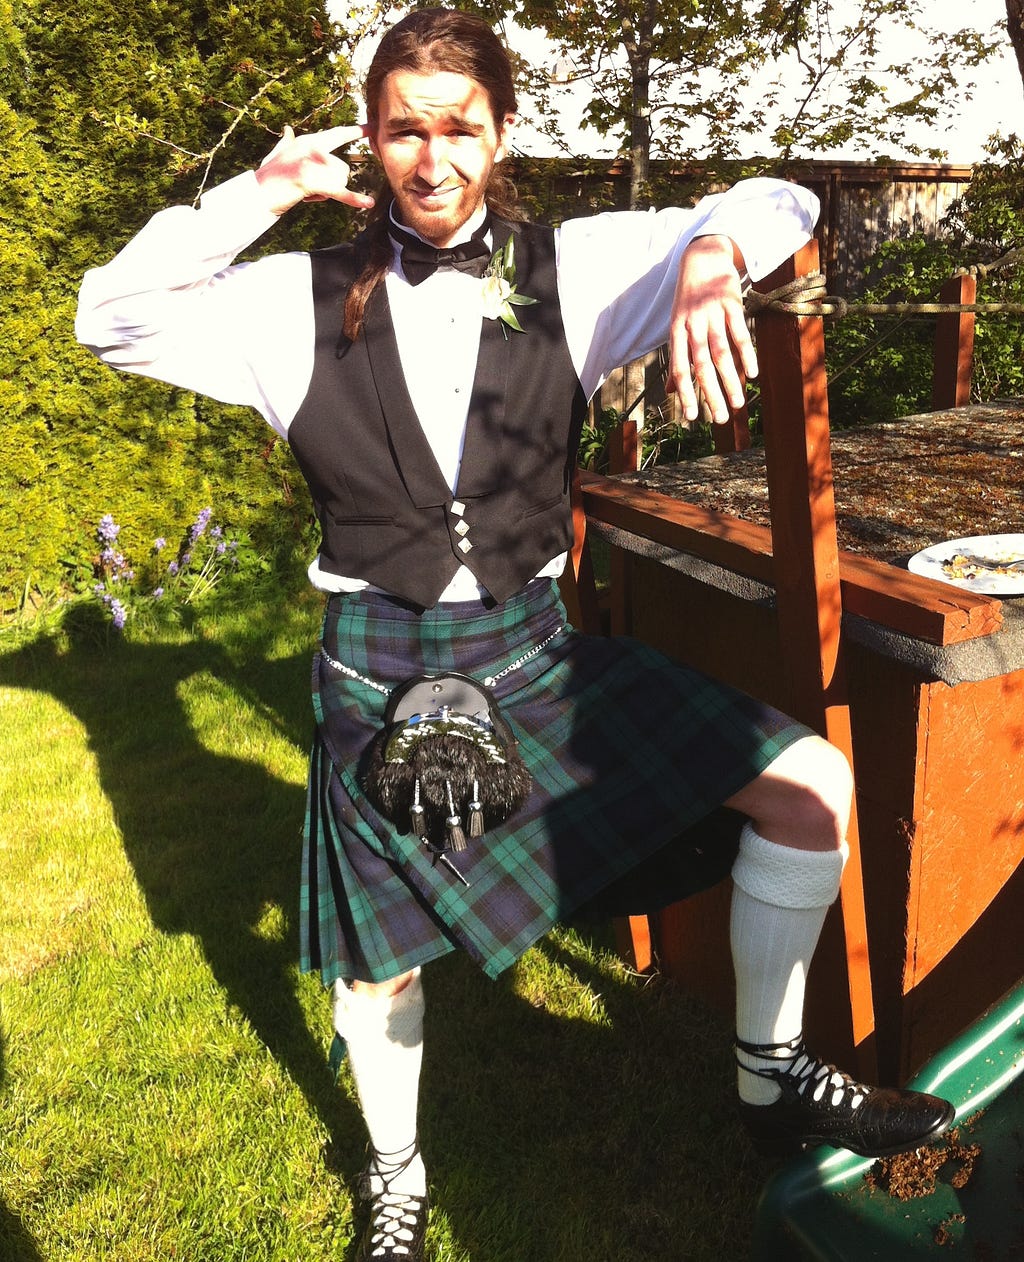 Me in a blue/green/black kilt, with white shirt, black vest, sporran pouch, thick white socks, and open black dress shoes. I’m making a ‘call me’ gesture with one hand, while leaning and stepping on a structure.